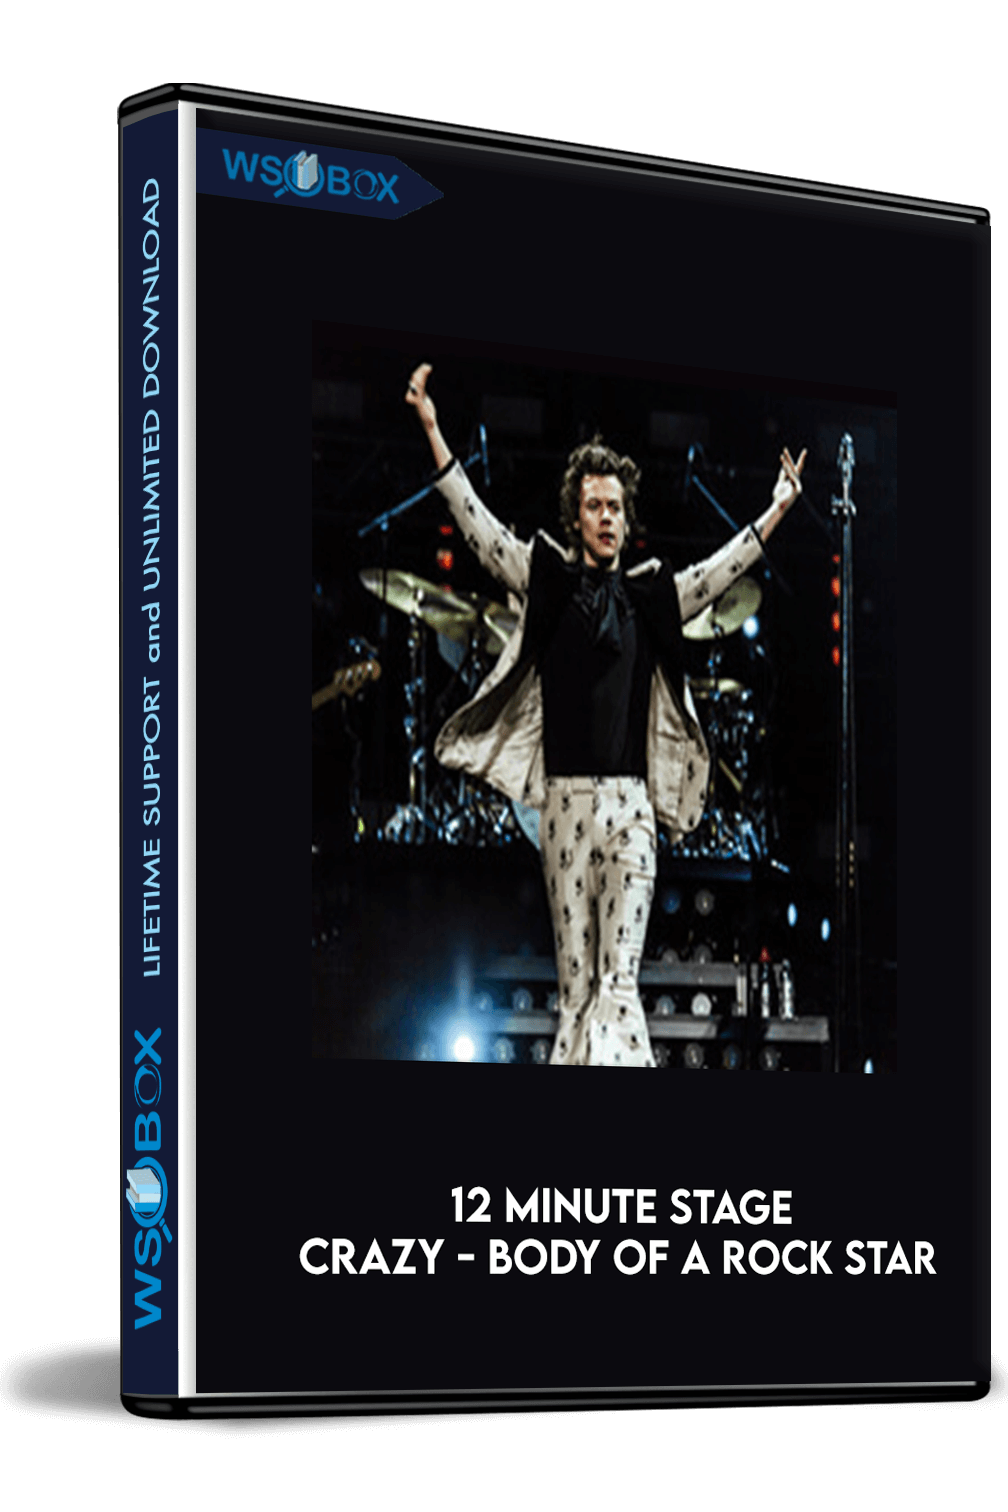 12-minute-stage-crazy-body-of-a-rock-star